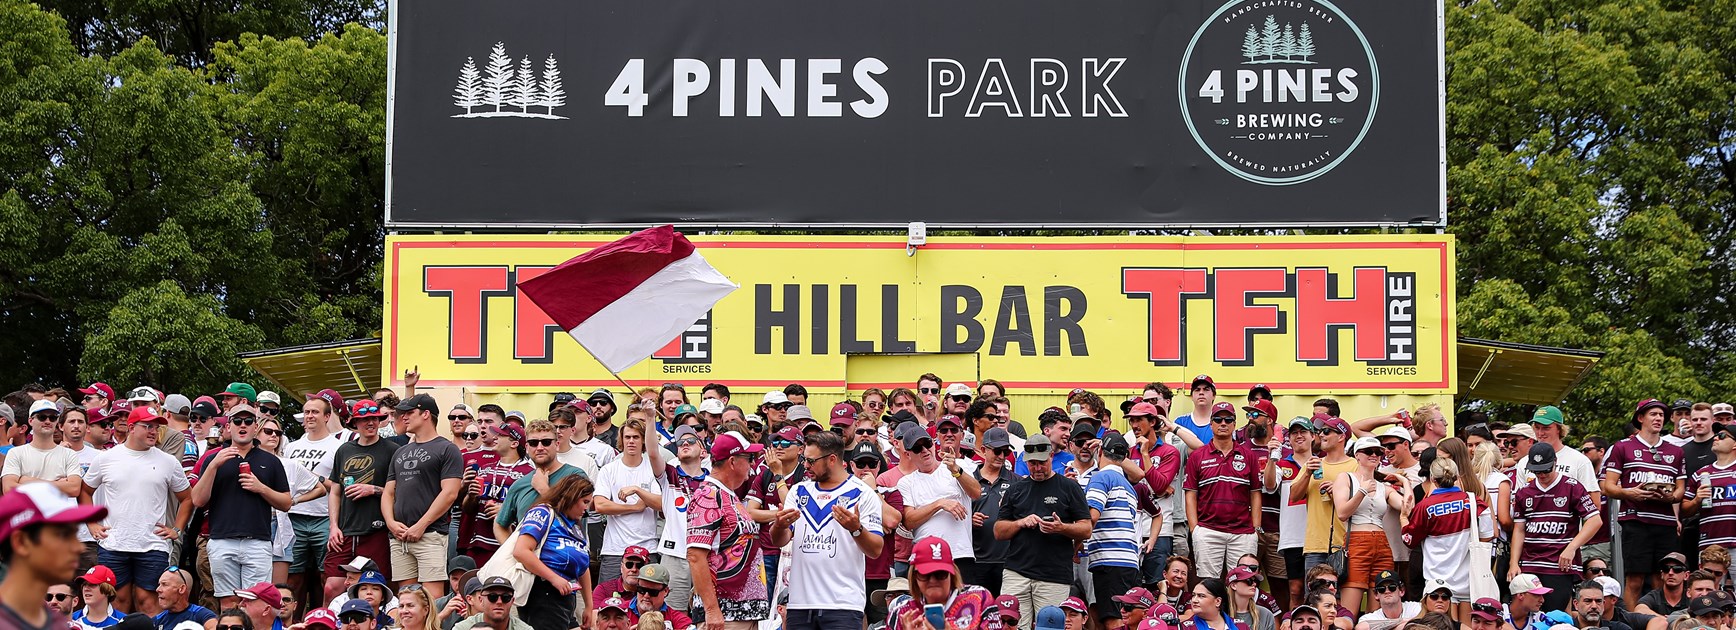 Sea Eagles to improve match day facilities and service